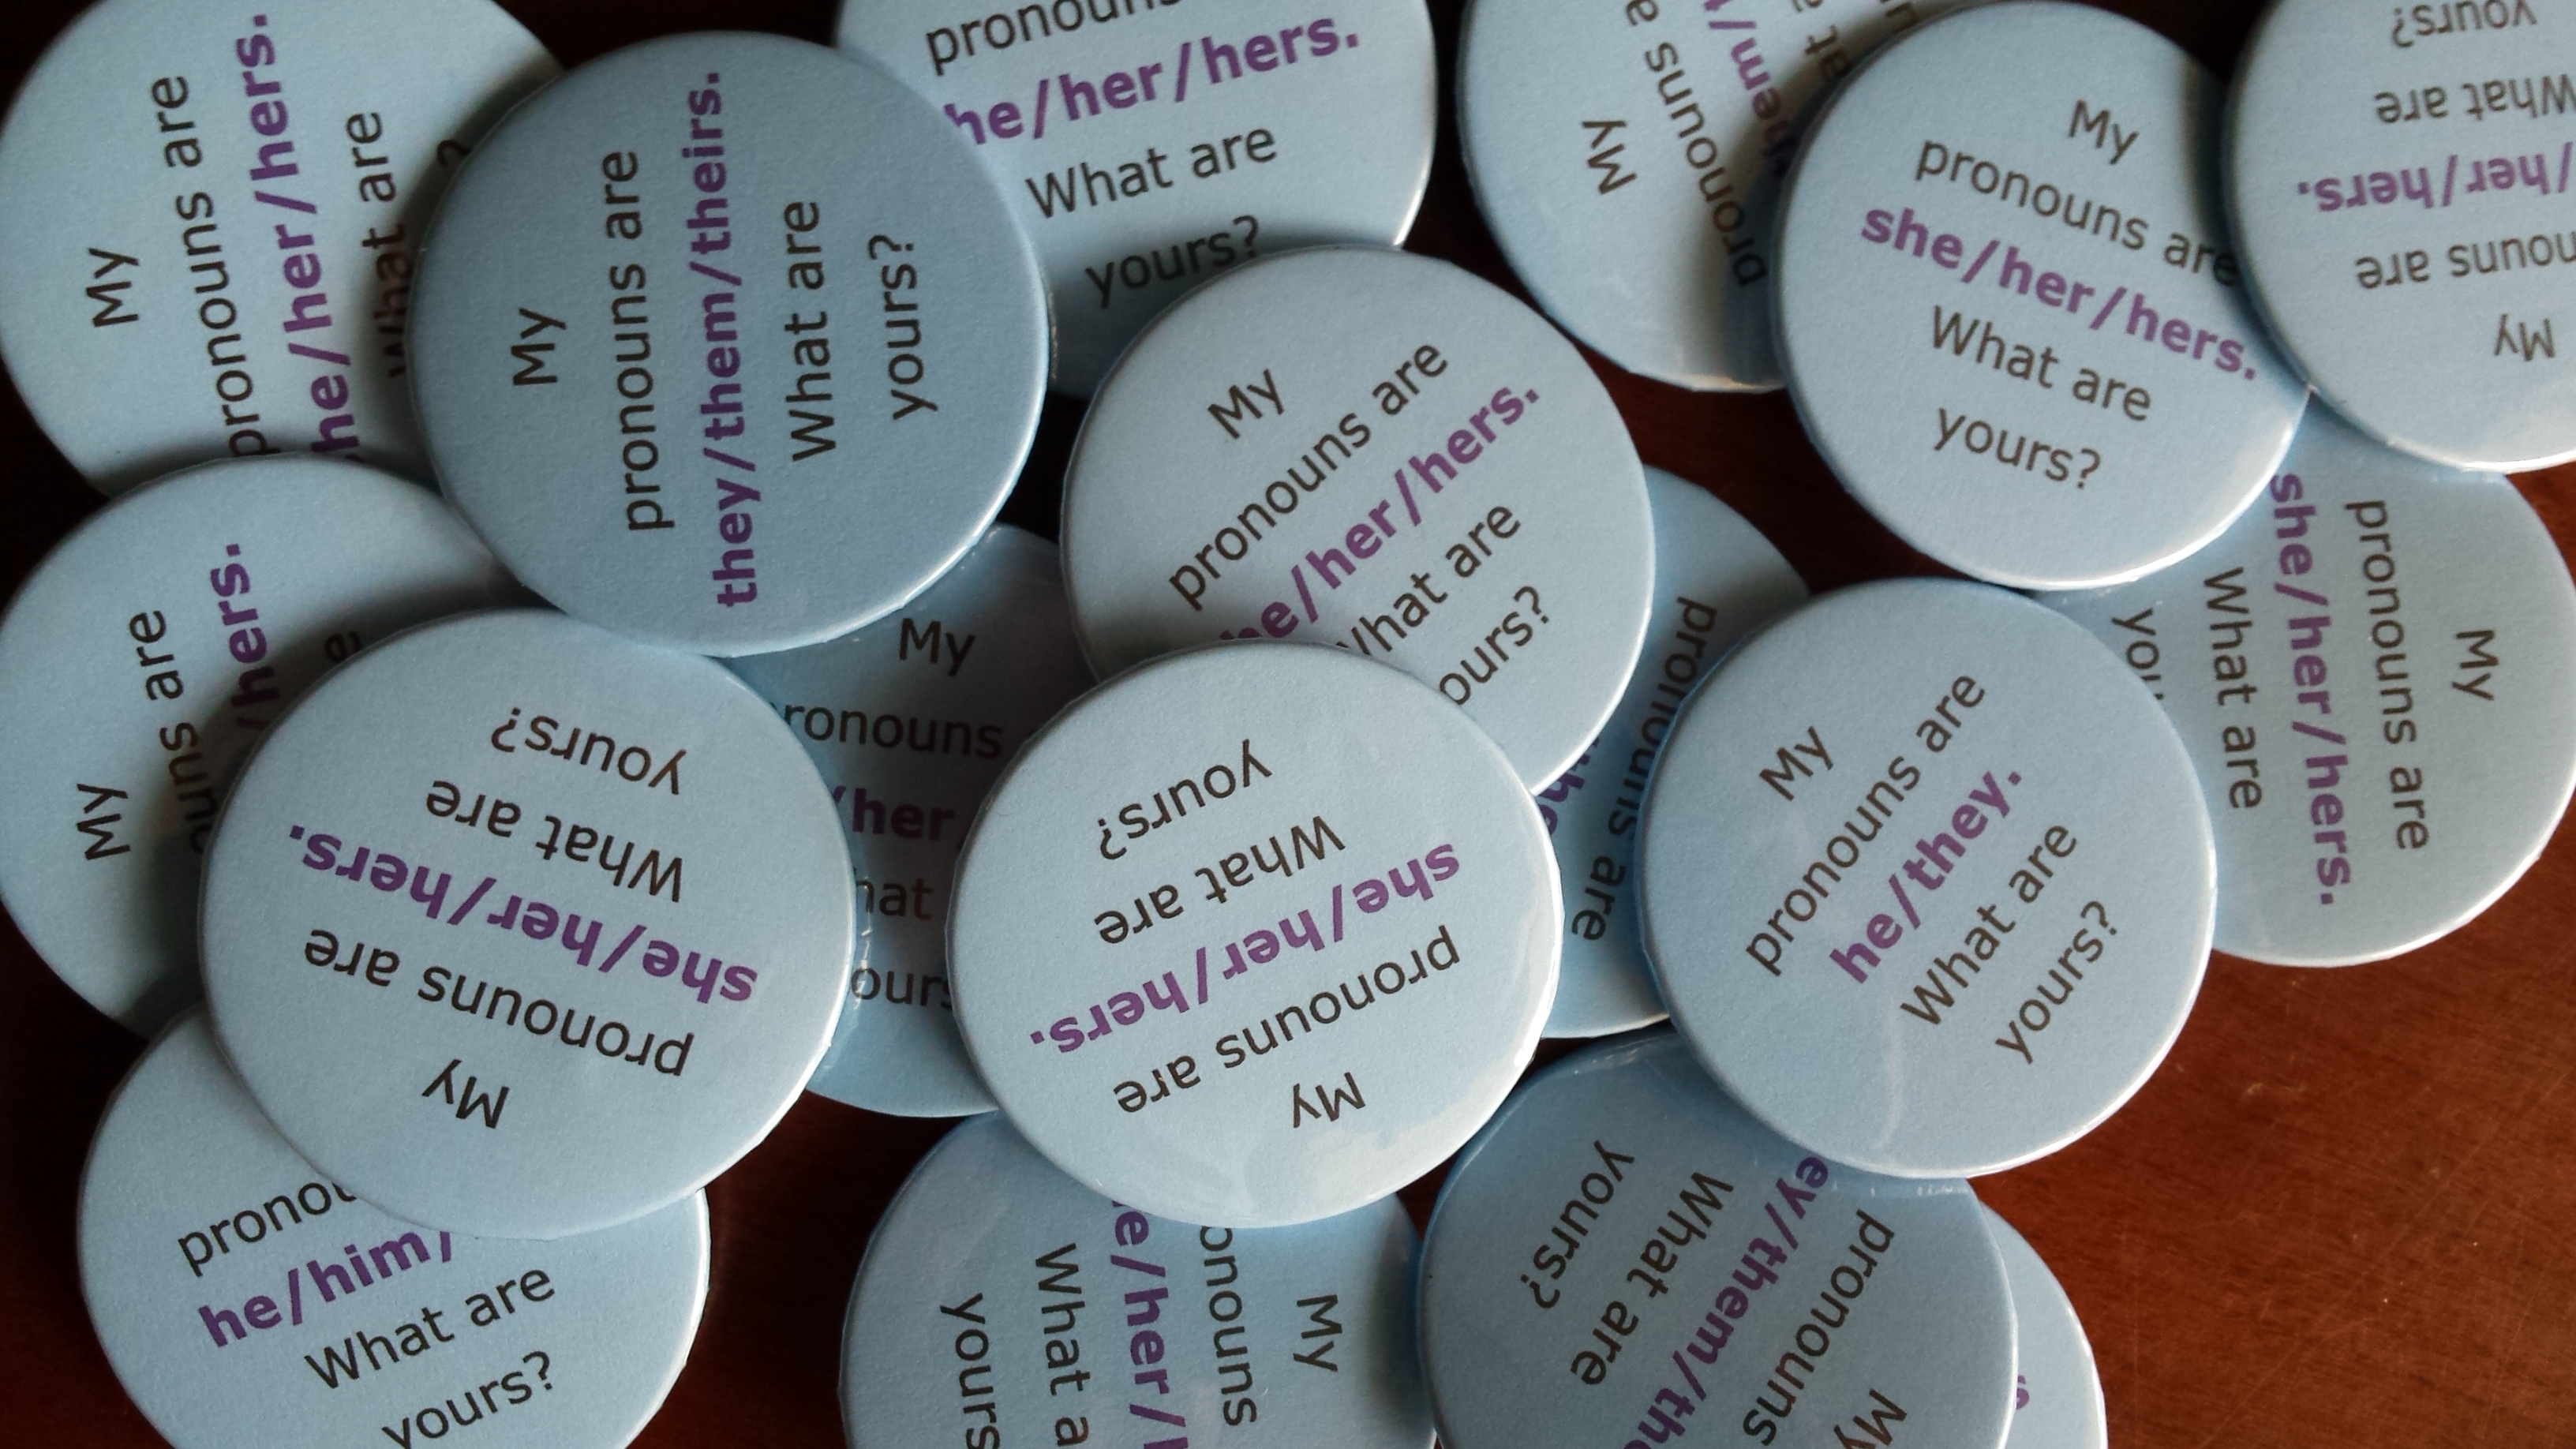 Pronoun buttons - My pronouns are they/them/theirs; he/they; she/her/hers. What are yours?